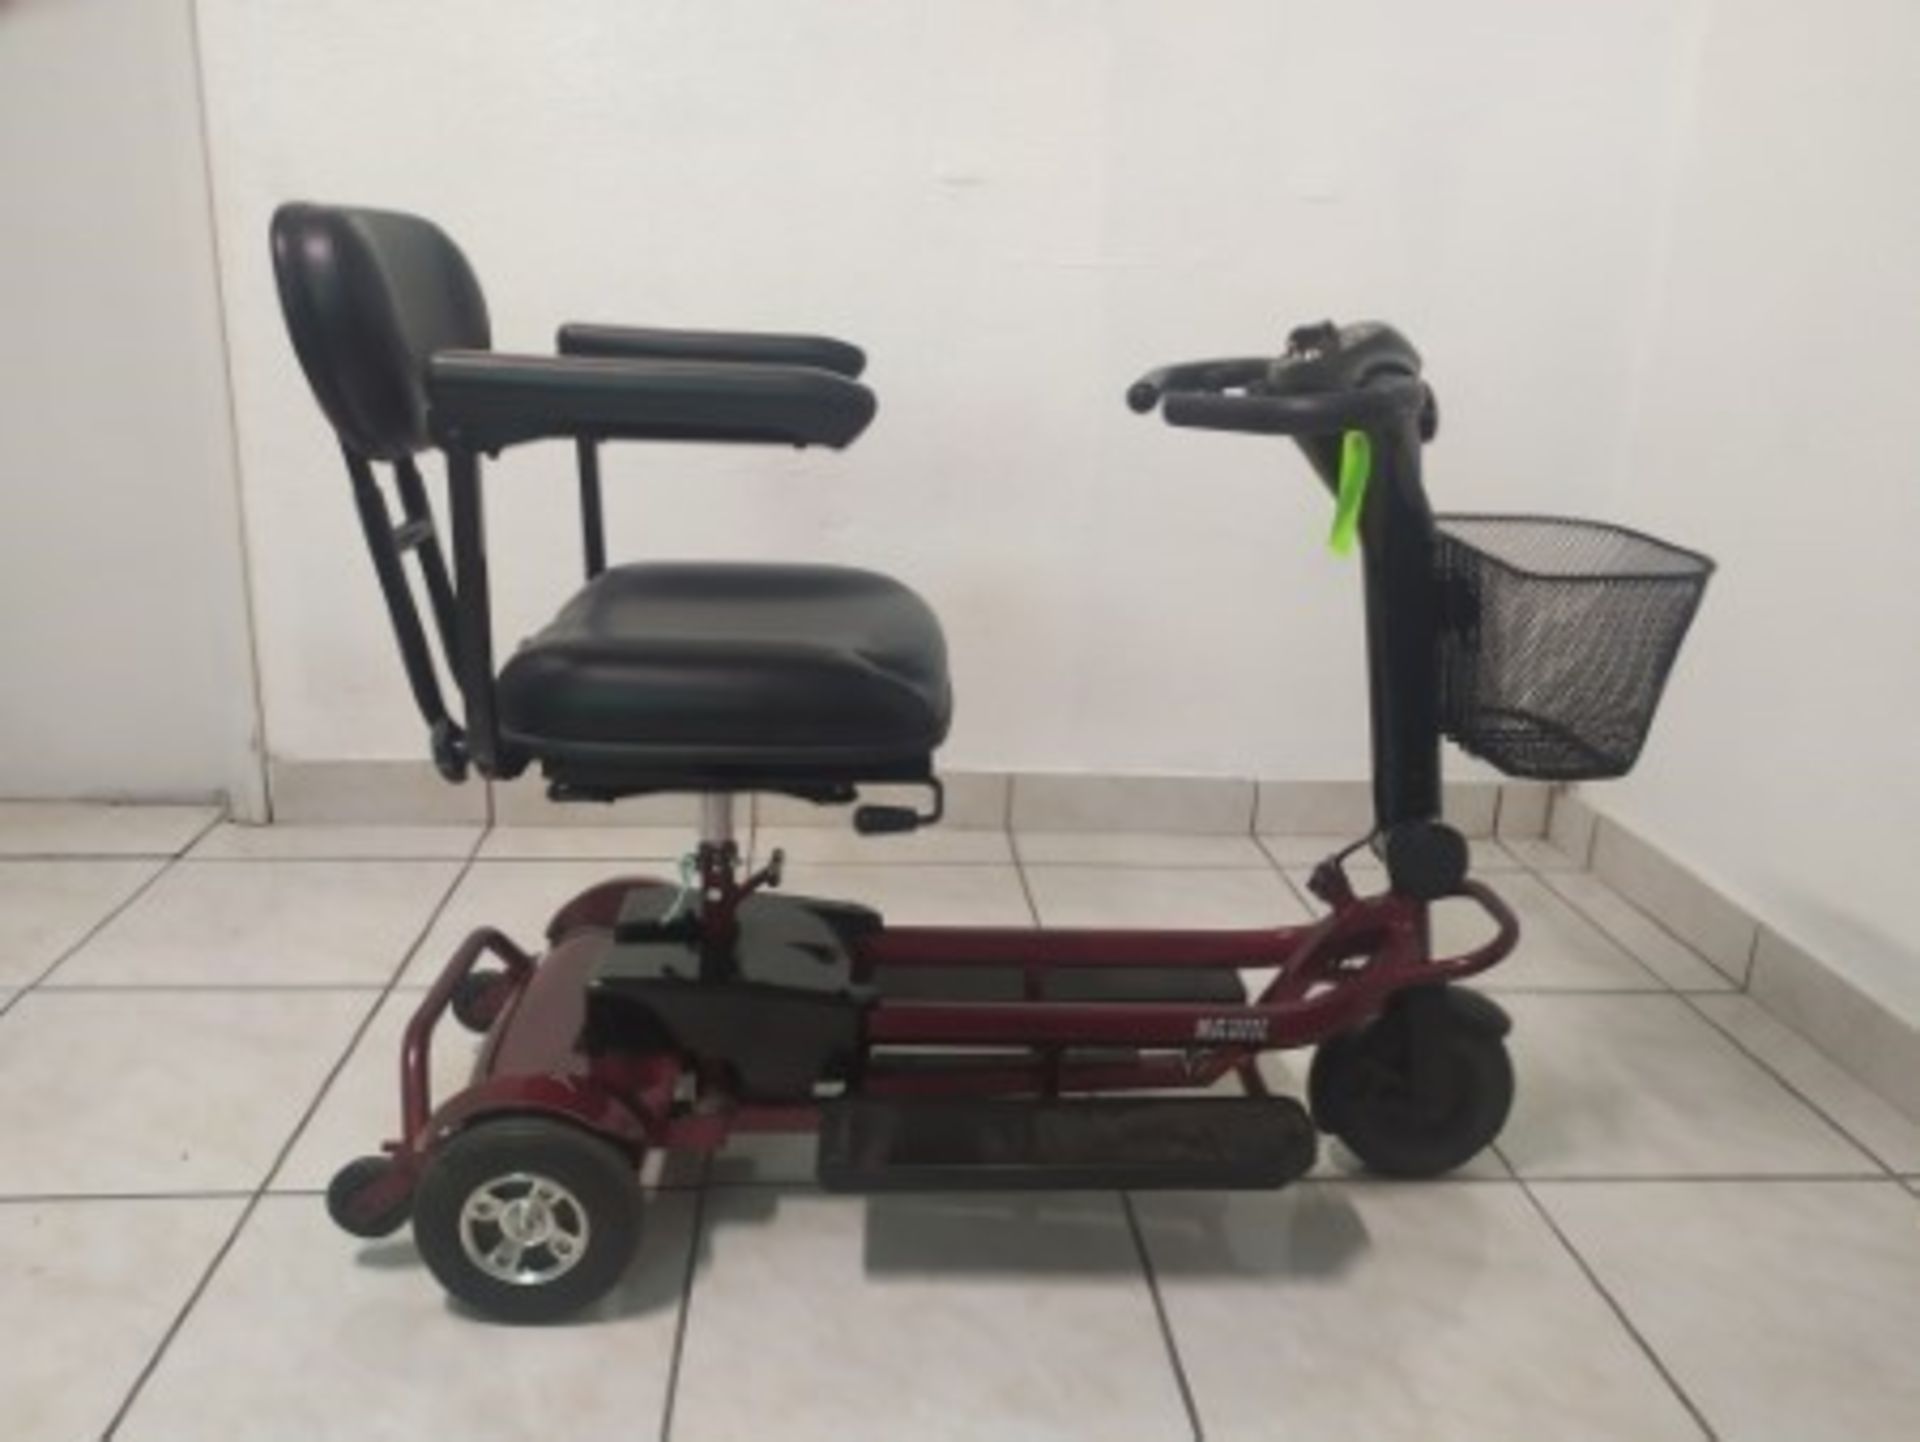 2009 DRIVE HAWK 3-WHEEL SCOOTER WITH BASKET - RED - 250LB CAPACITY - SERIAL No. 2A06090152PQ (NO CHA - Image 6 of 6